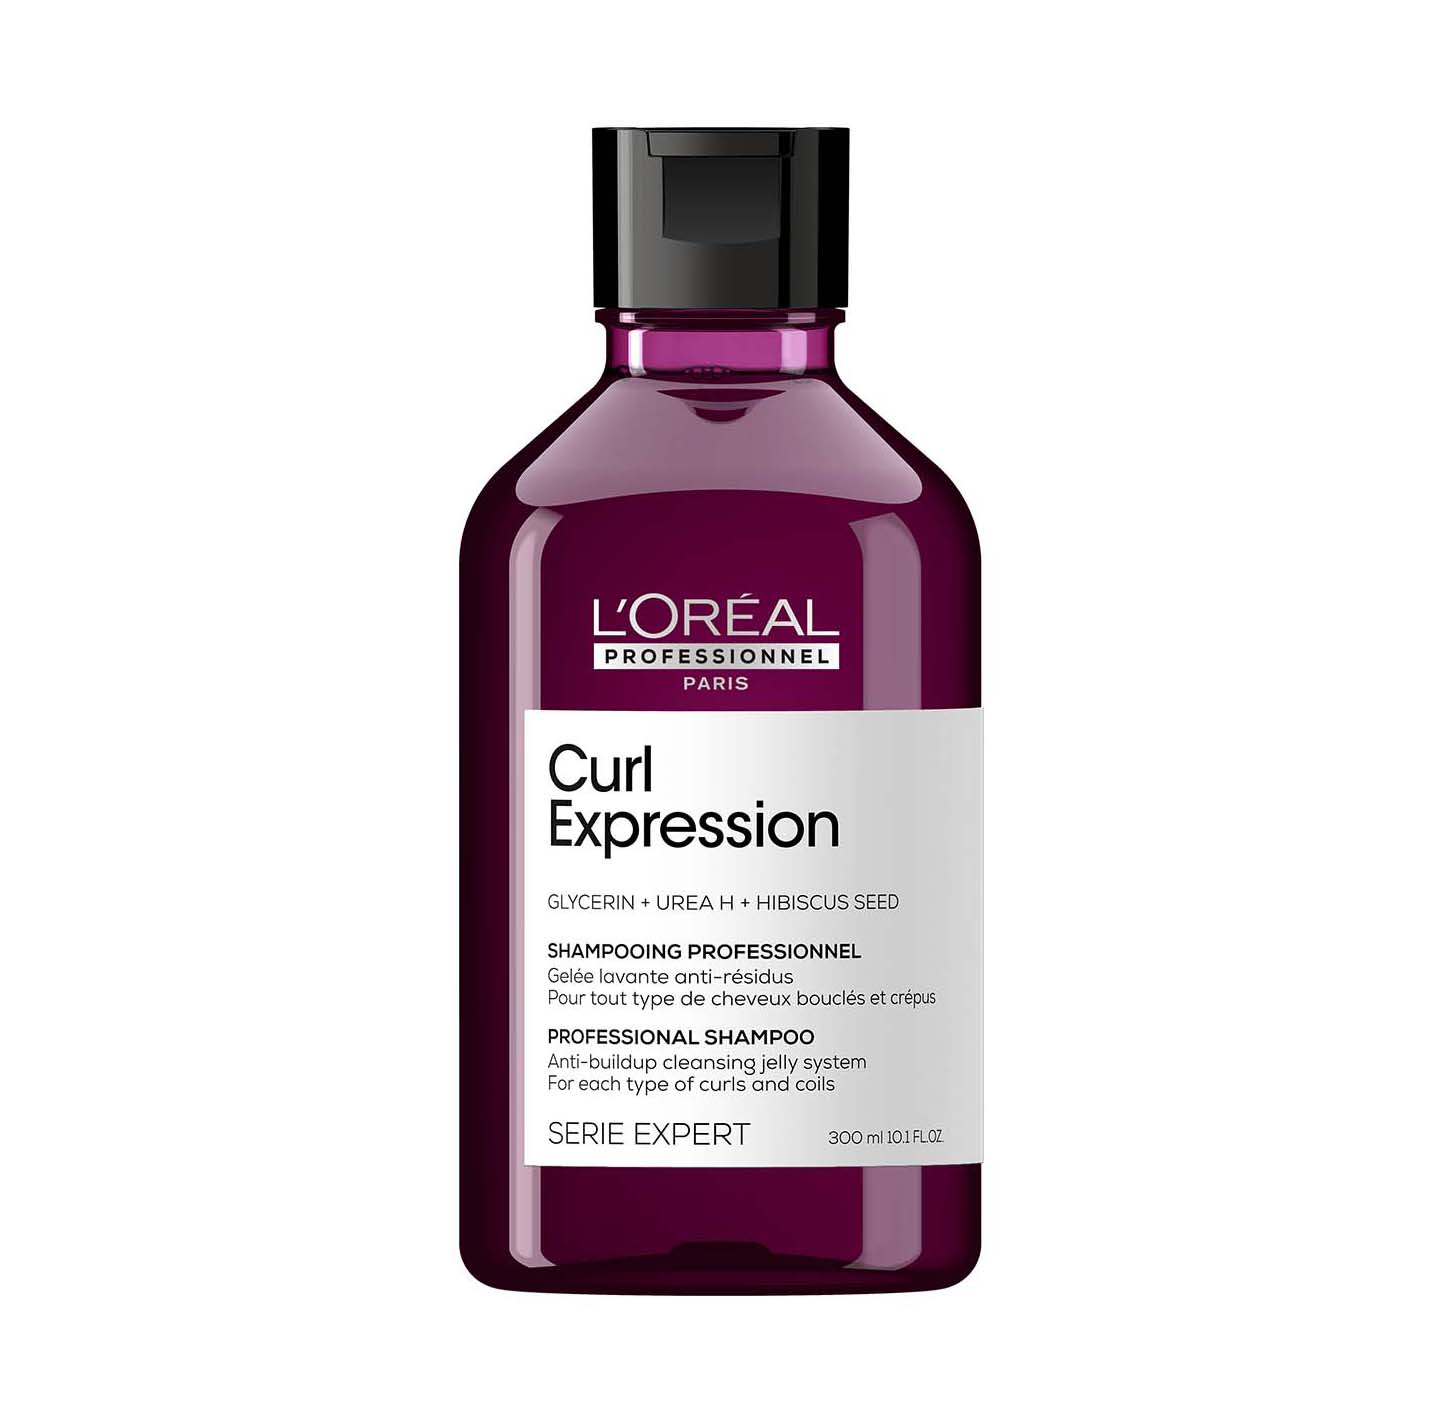 L'Oreal Professionnel Curl Expression Gel-Shampoo Anti-Buildup Cleansing Jelly 300ml